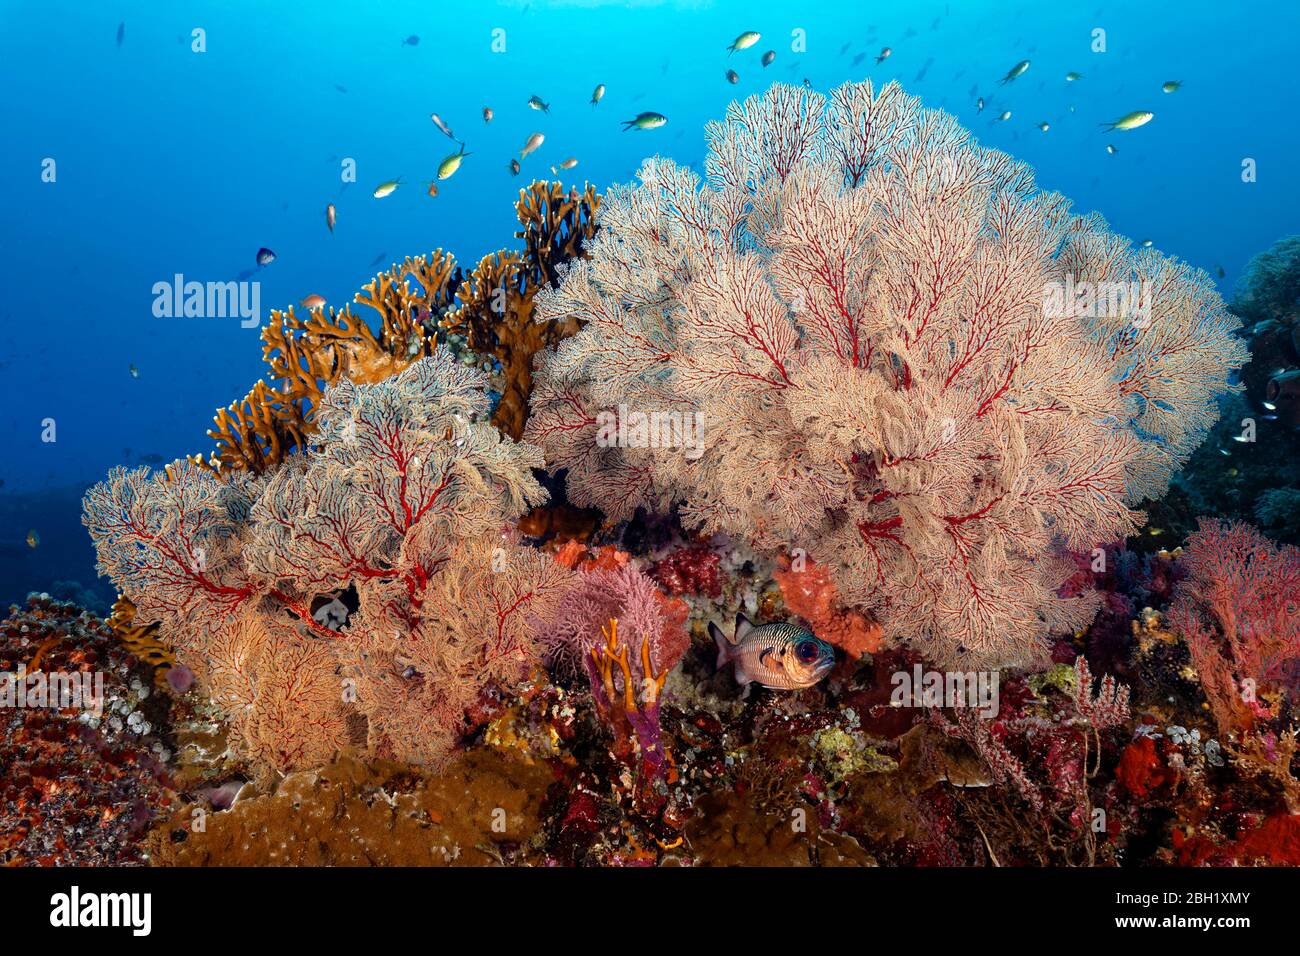 Shadowfin soldierfish (Myripristis adusta), gorgonians (Melithaea sp.), on top Millepora fire coral yellow (Millepora dichotoma), Pacific Ocean, Sulu Stock Photo